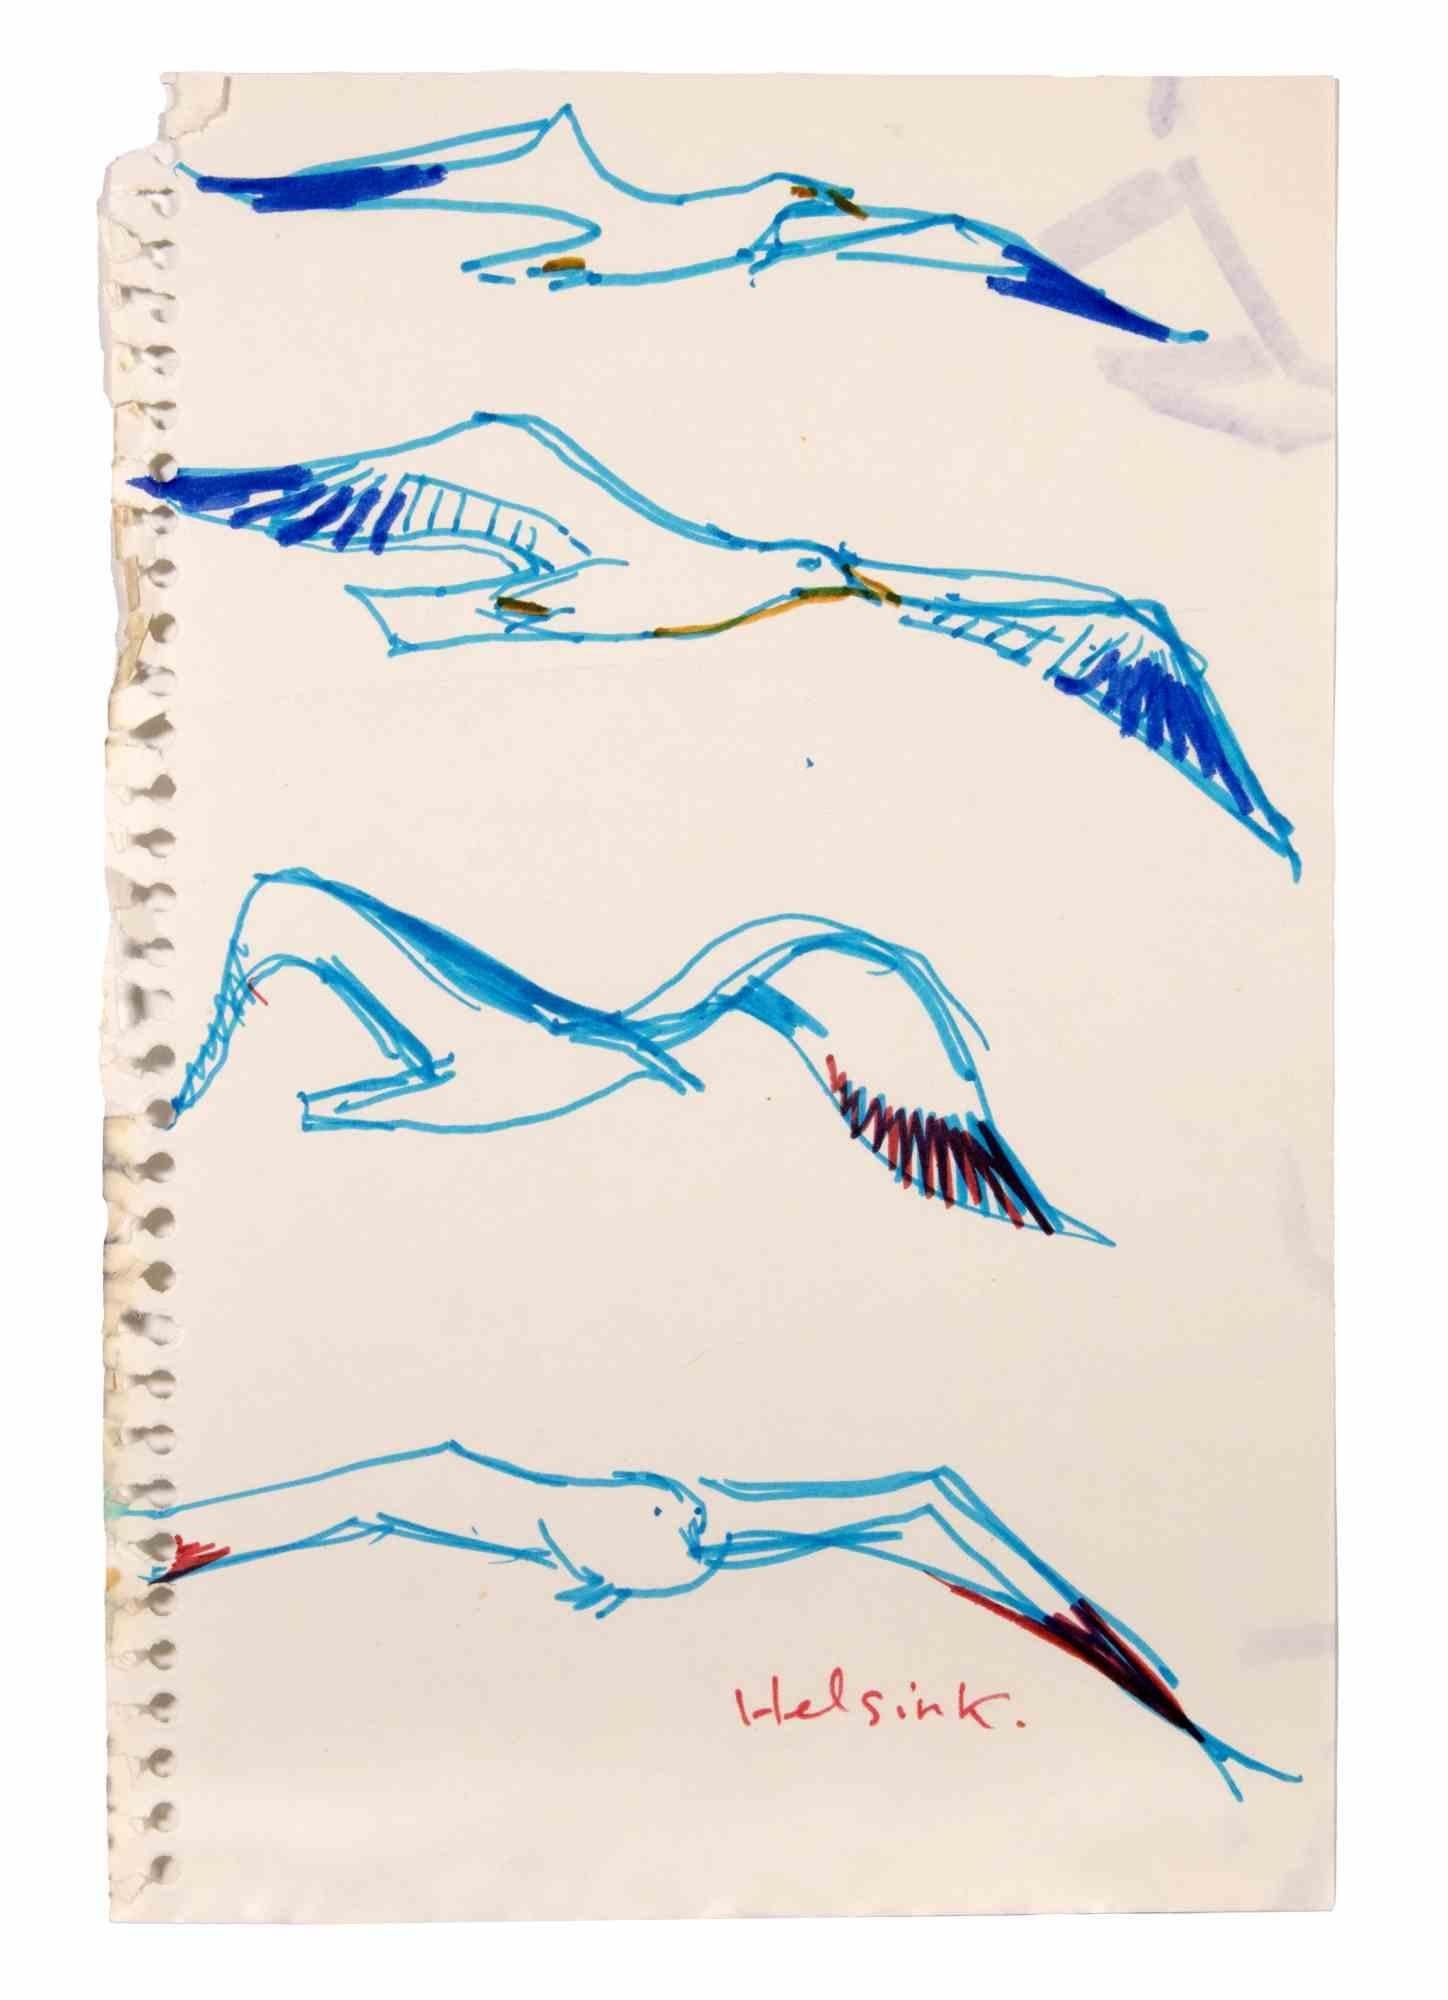 Birds is a Color Markers Drawing realized by  Reynold Arnould  (Le Havre 1919 - Paris 1980).

Good condition on a little sheet of a notebook.

No signature.

Reynold Arnould was born in Le Havre, France in 1919. He studied at l'École des Beaux-Arts